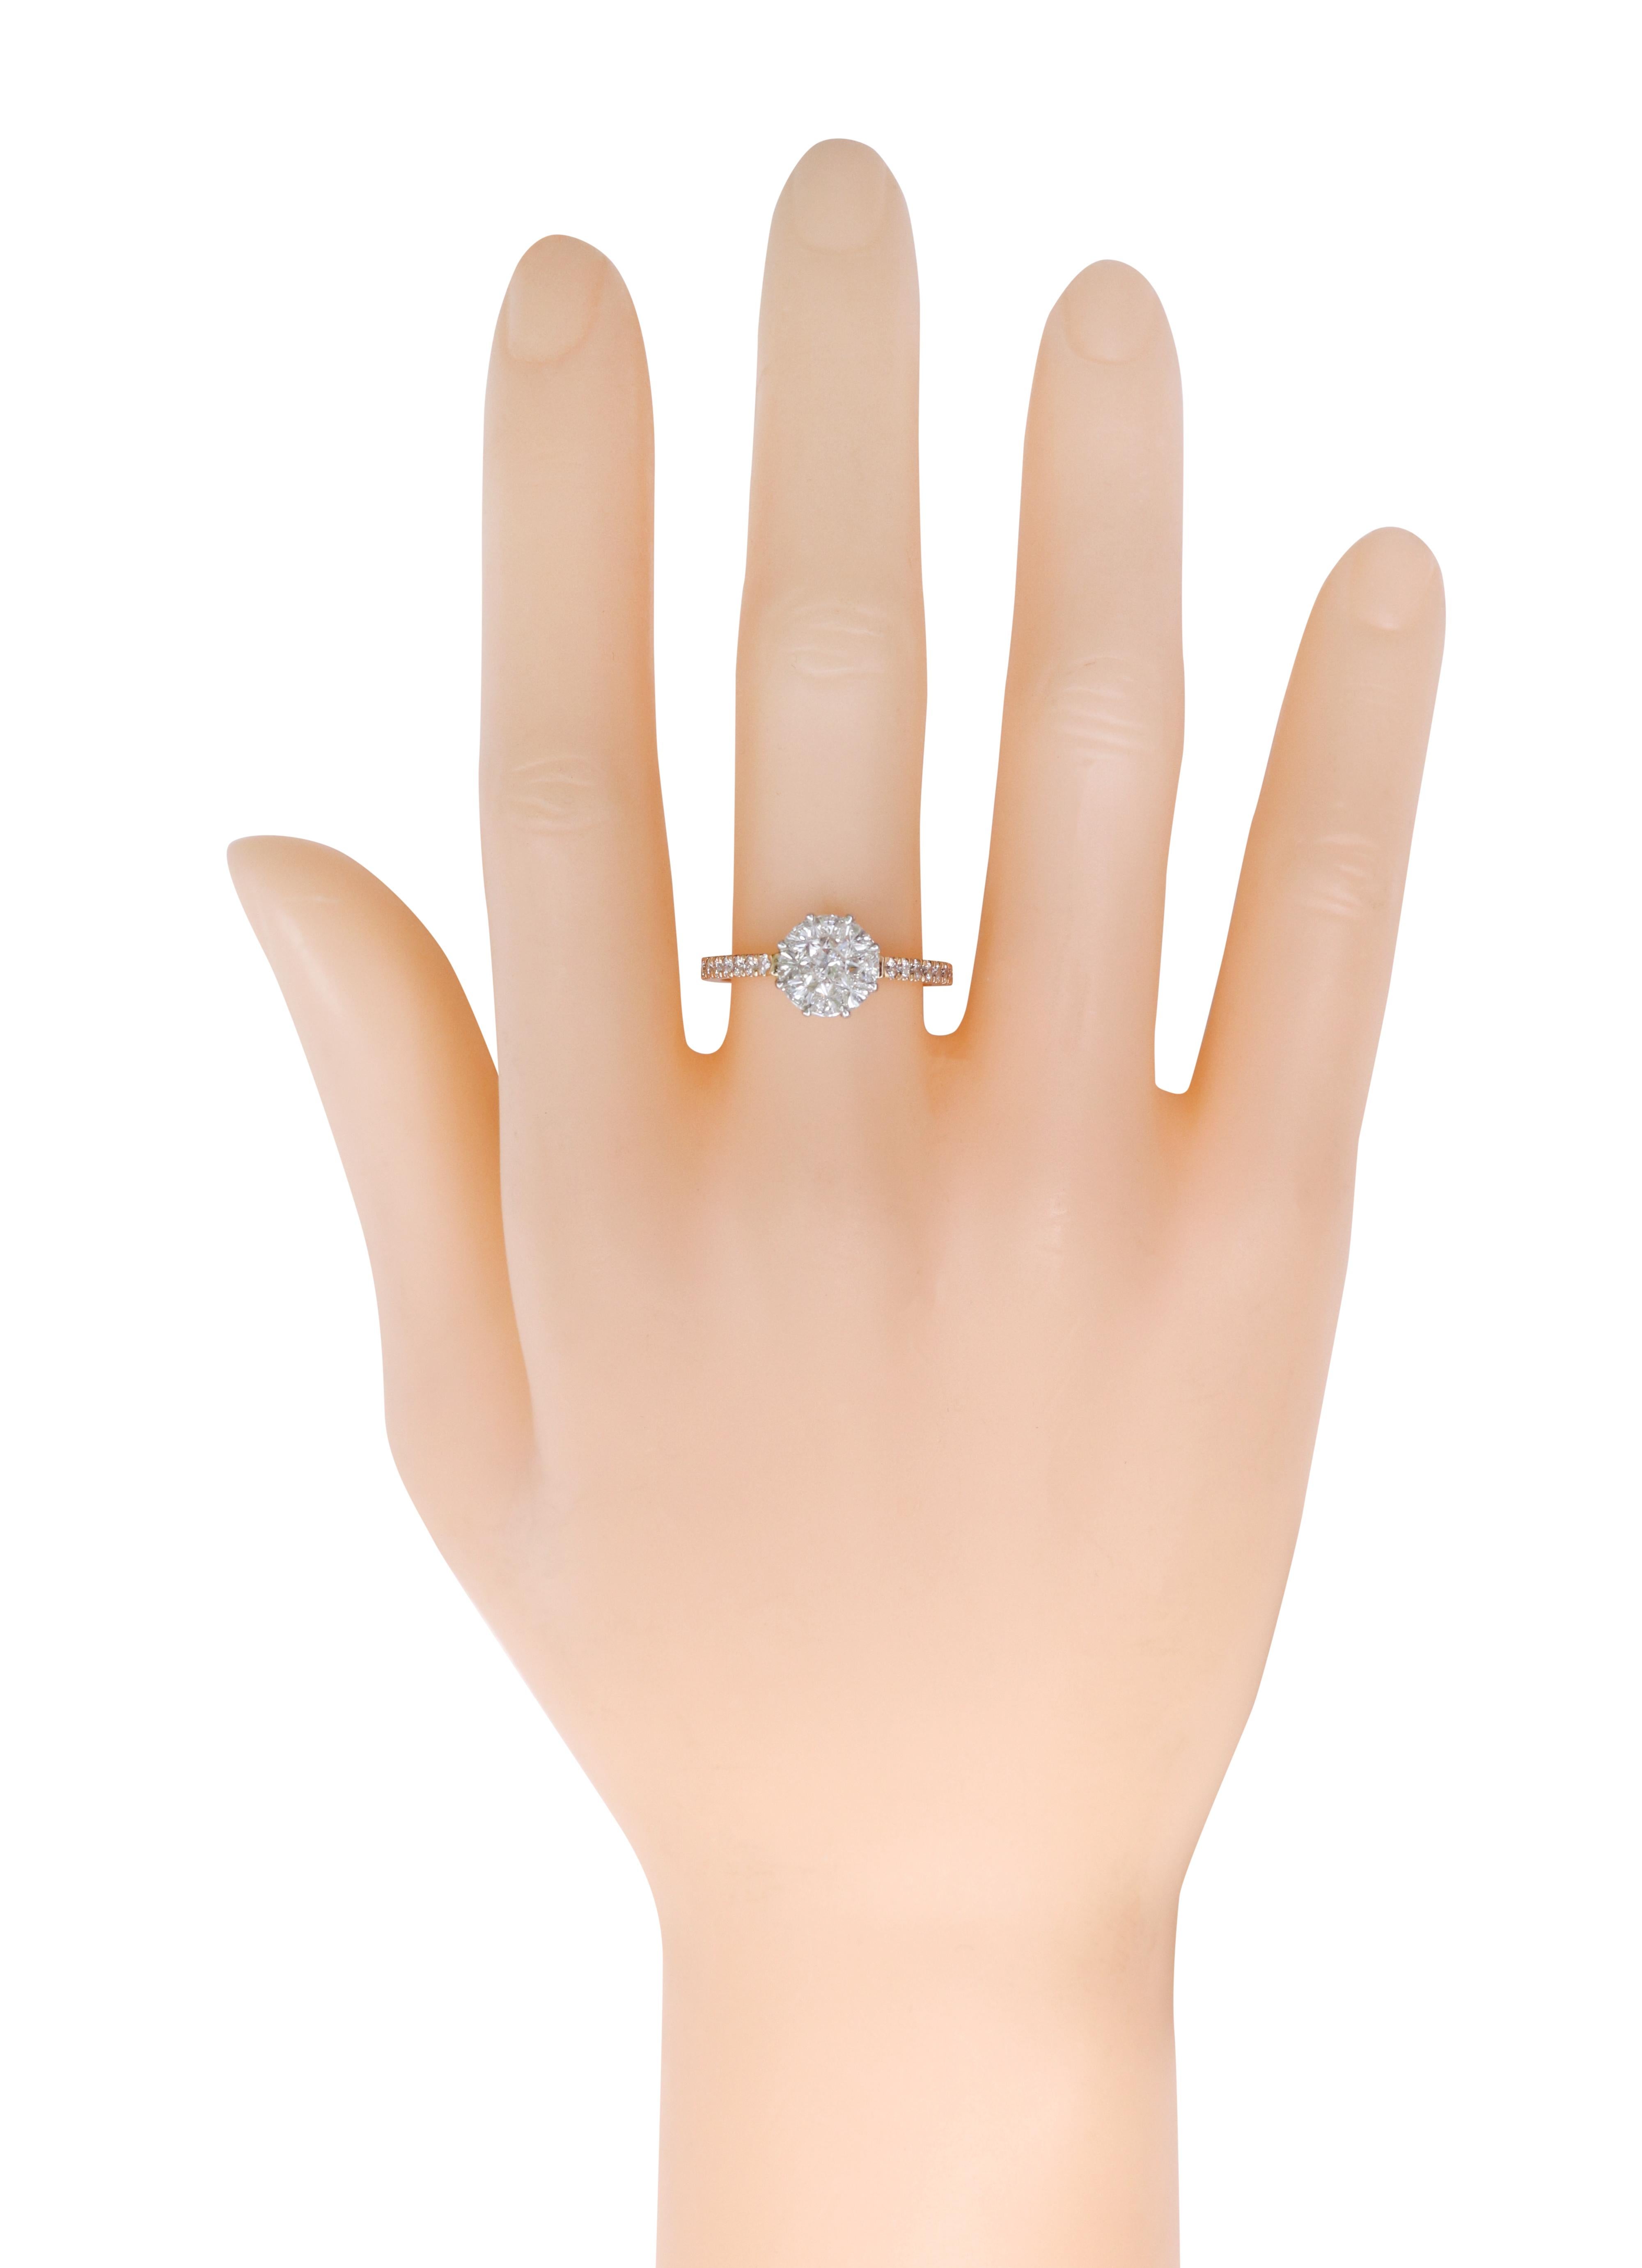 18 Karat Gold 1.00 Carat Diamond Engagement Ring

You will be mesmerized to witness how perfect the adornments of this glamorous ring are. They are bestowed with a superior finish and organic silhouette. Its design is timeless, elegant and